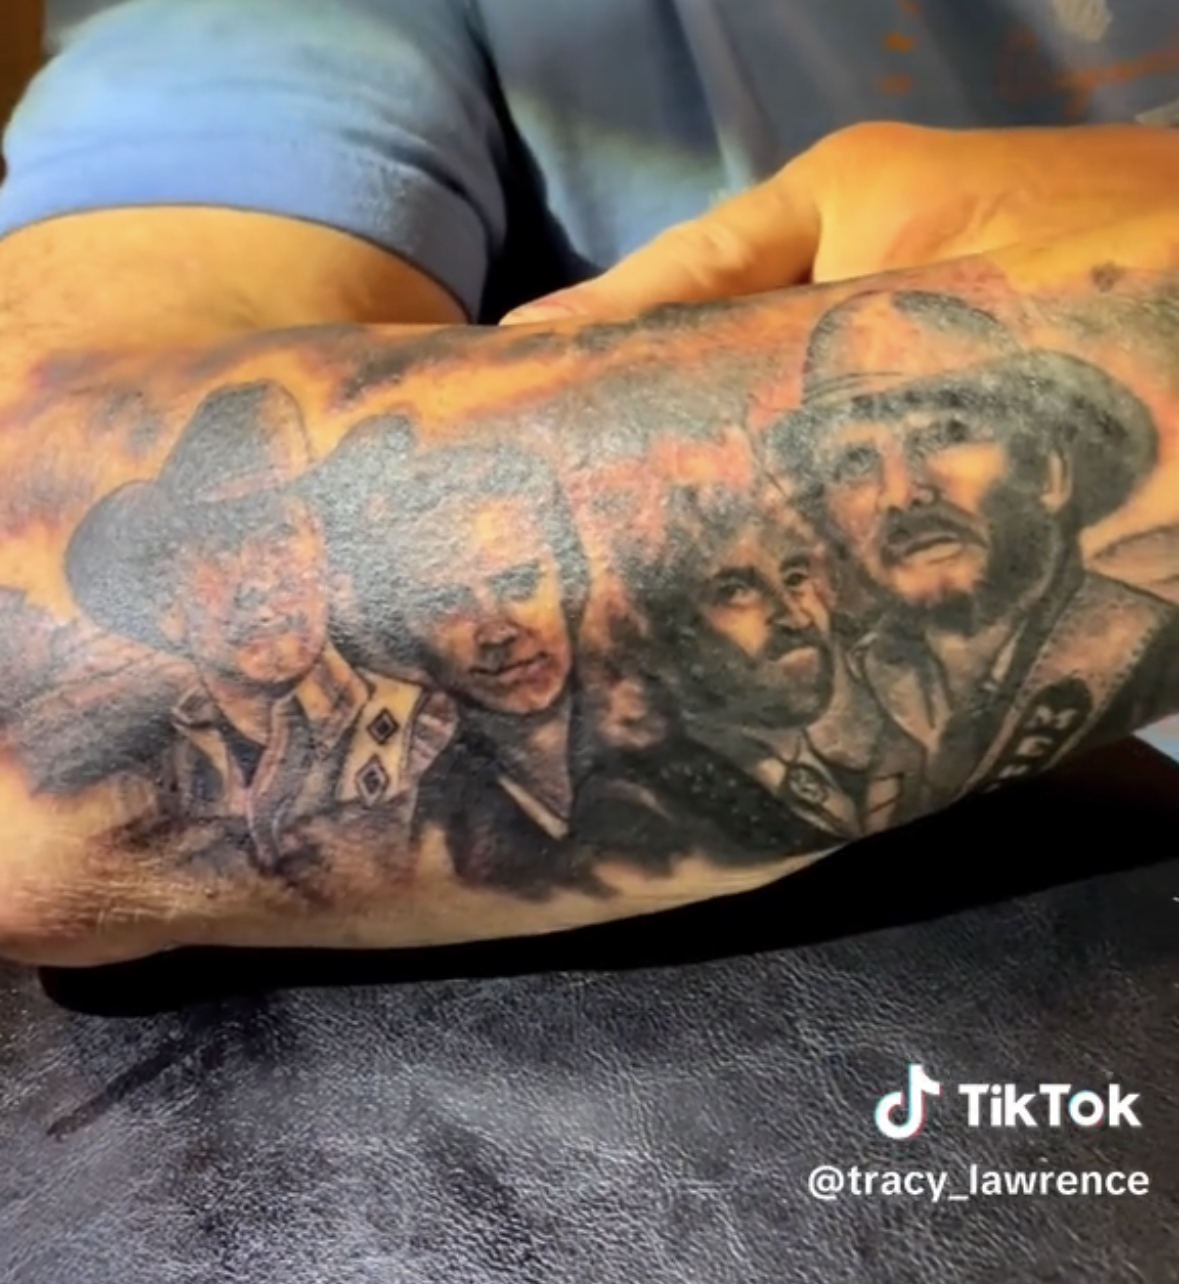 Tattoosday (A Tattoo Blog): Gene's Tattoo Commemorates His Service to Our  Country